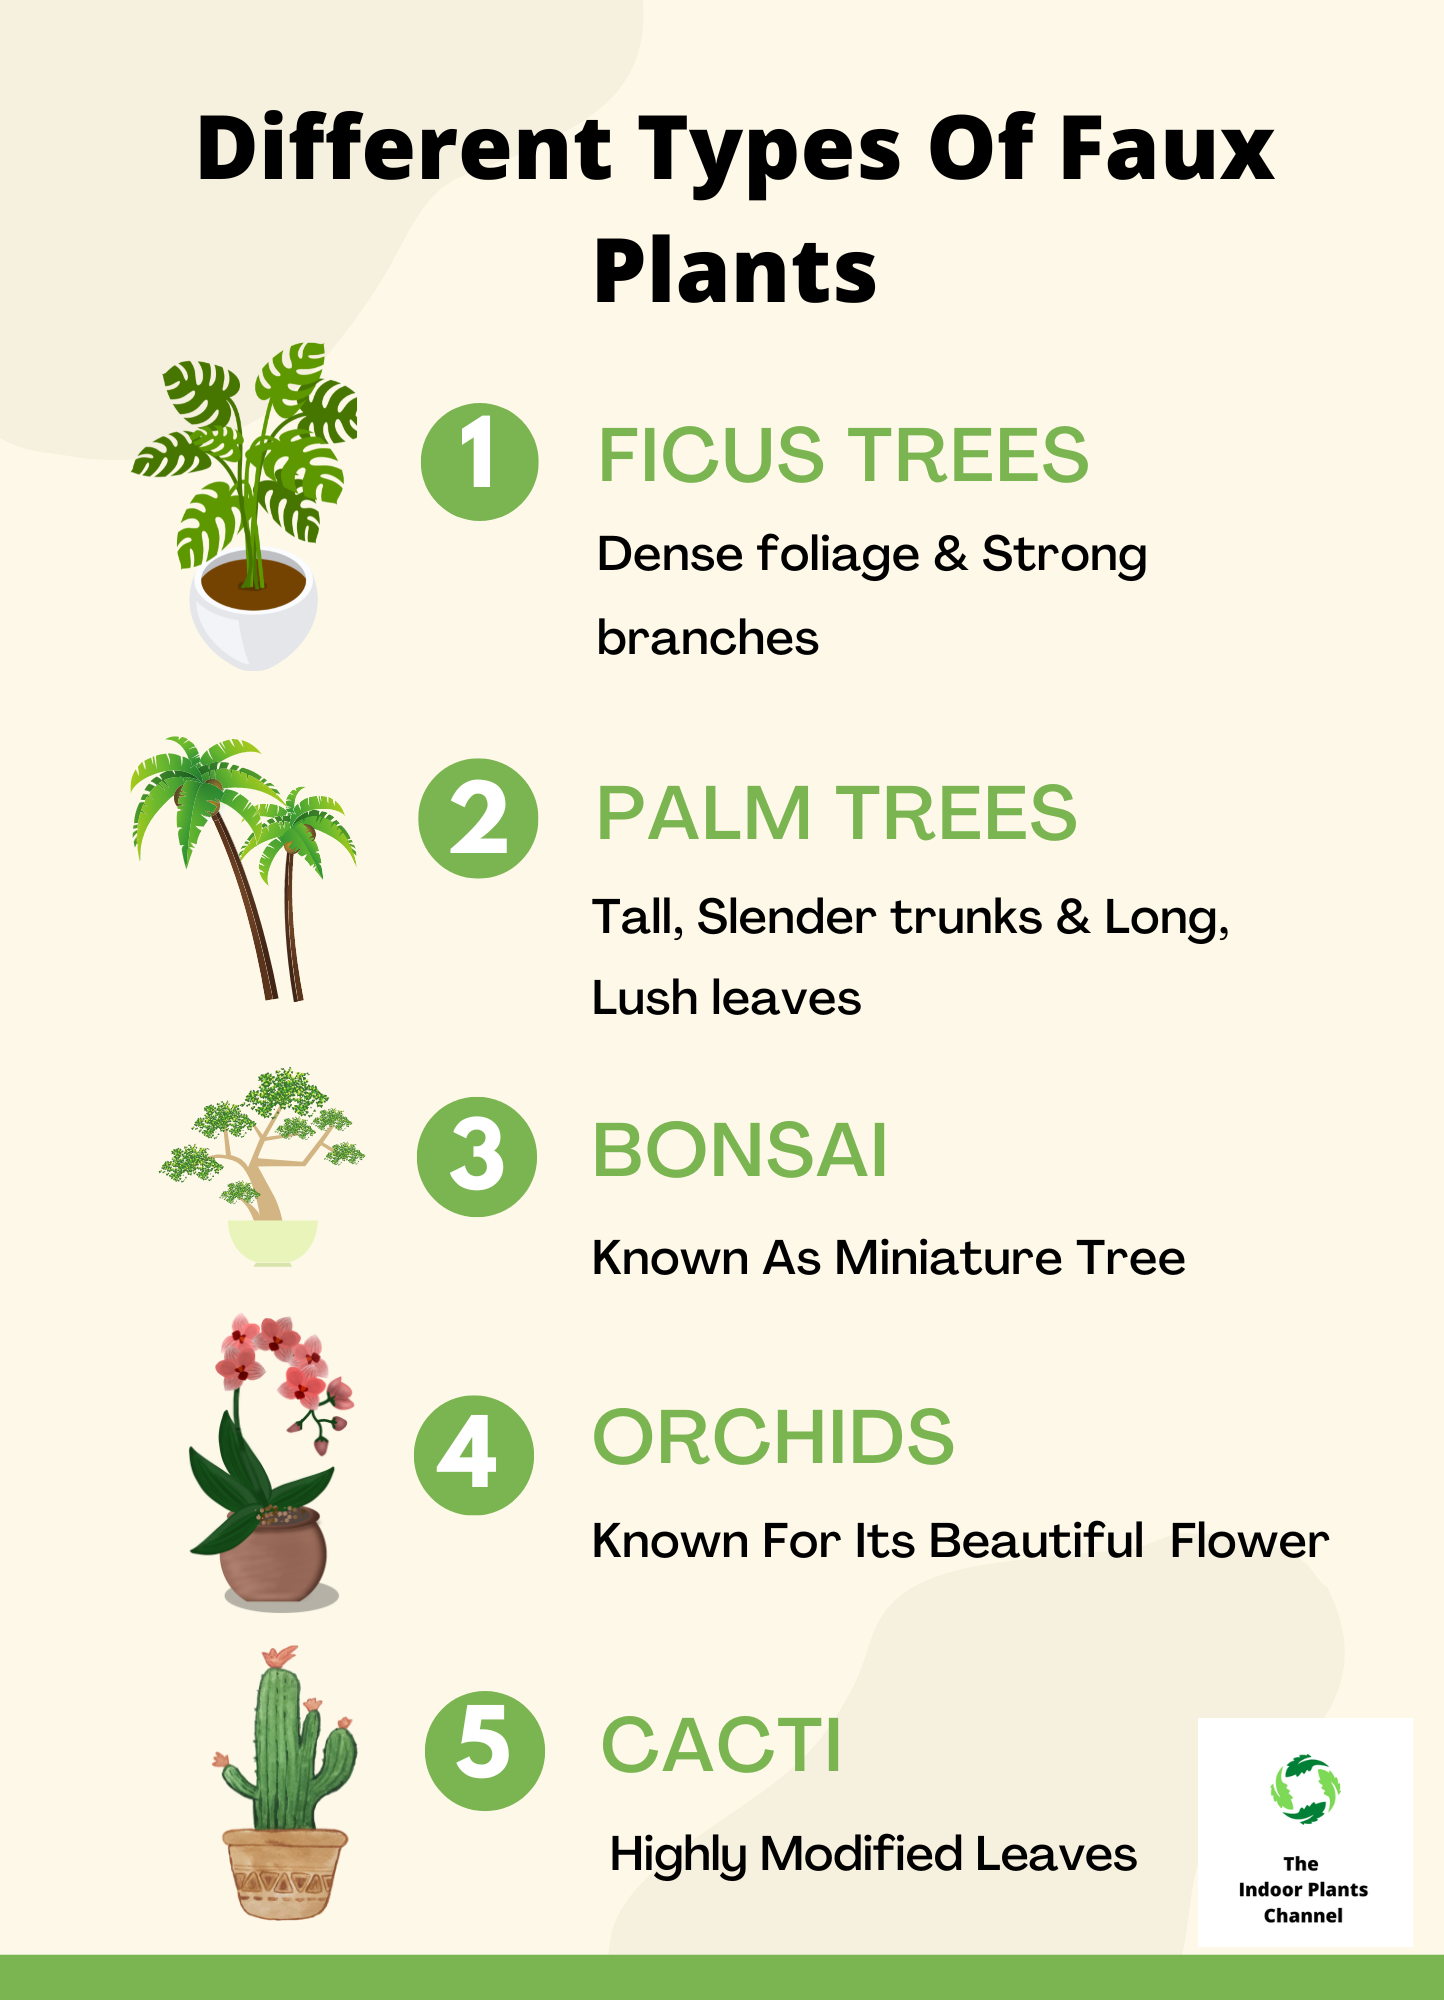 The Different Types Of Faux Plants